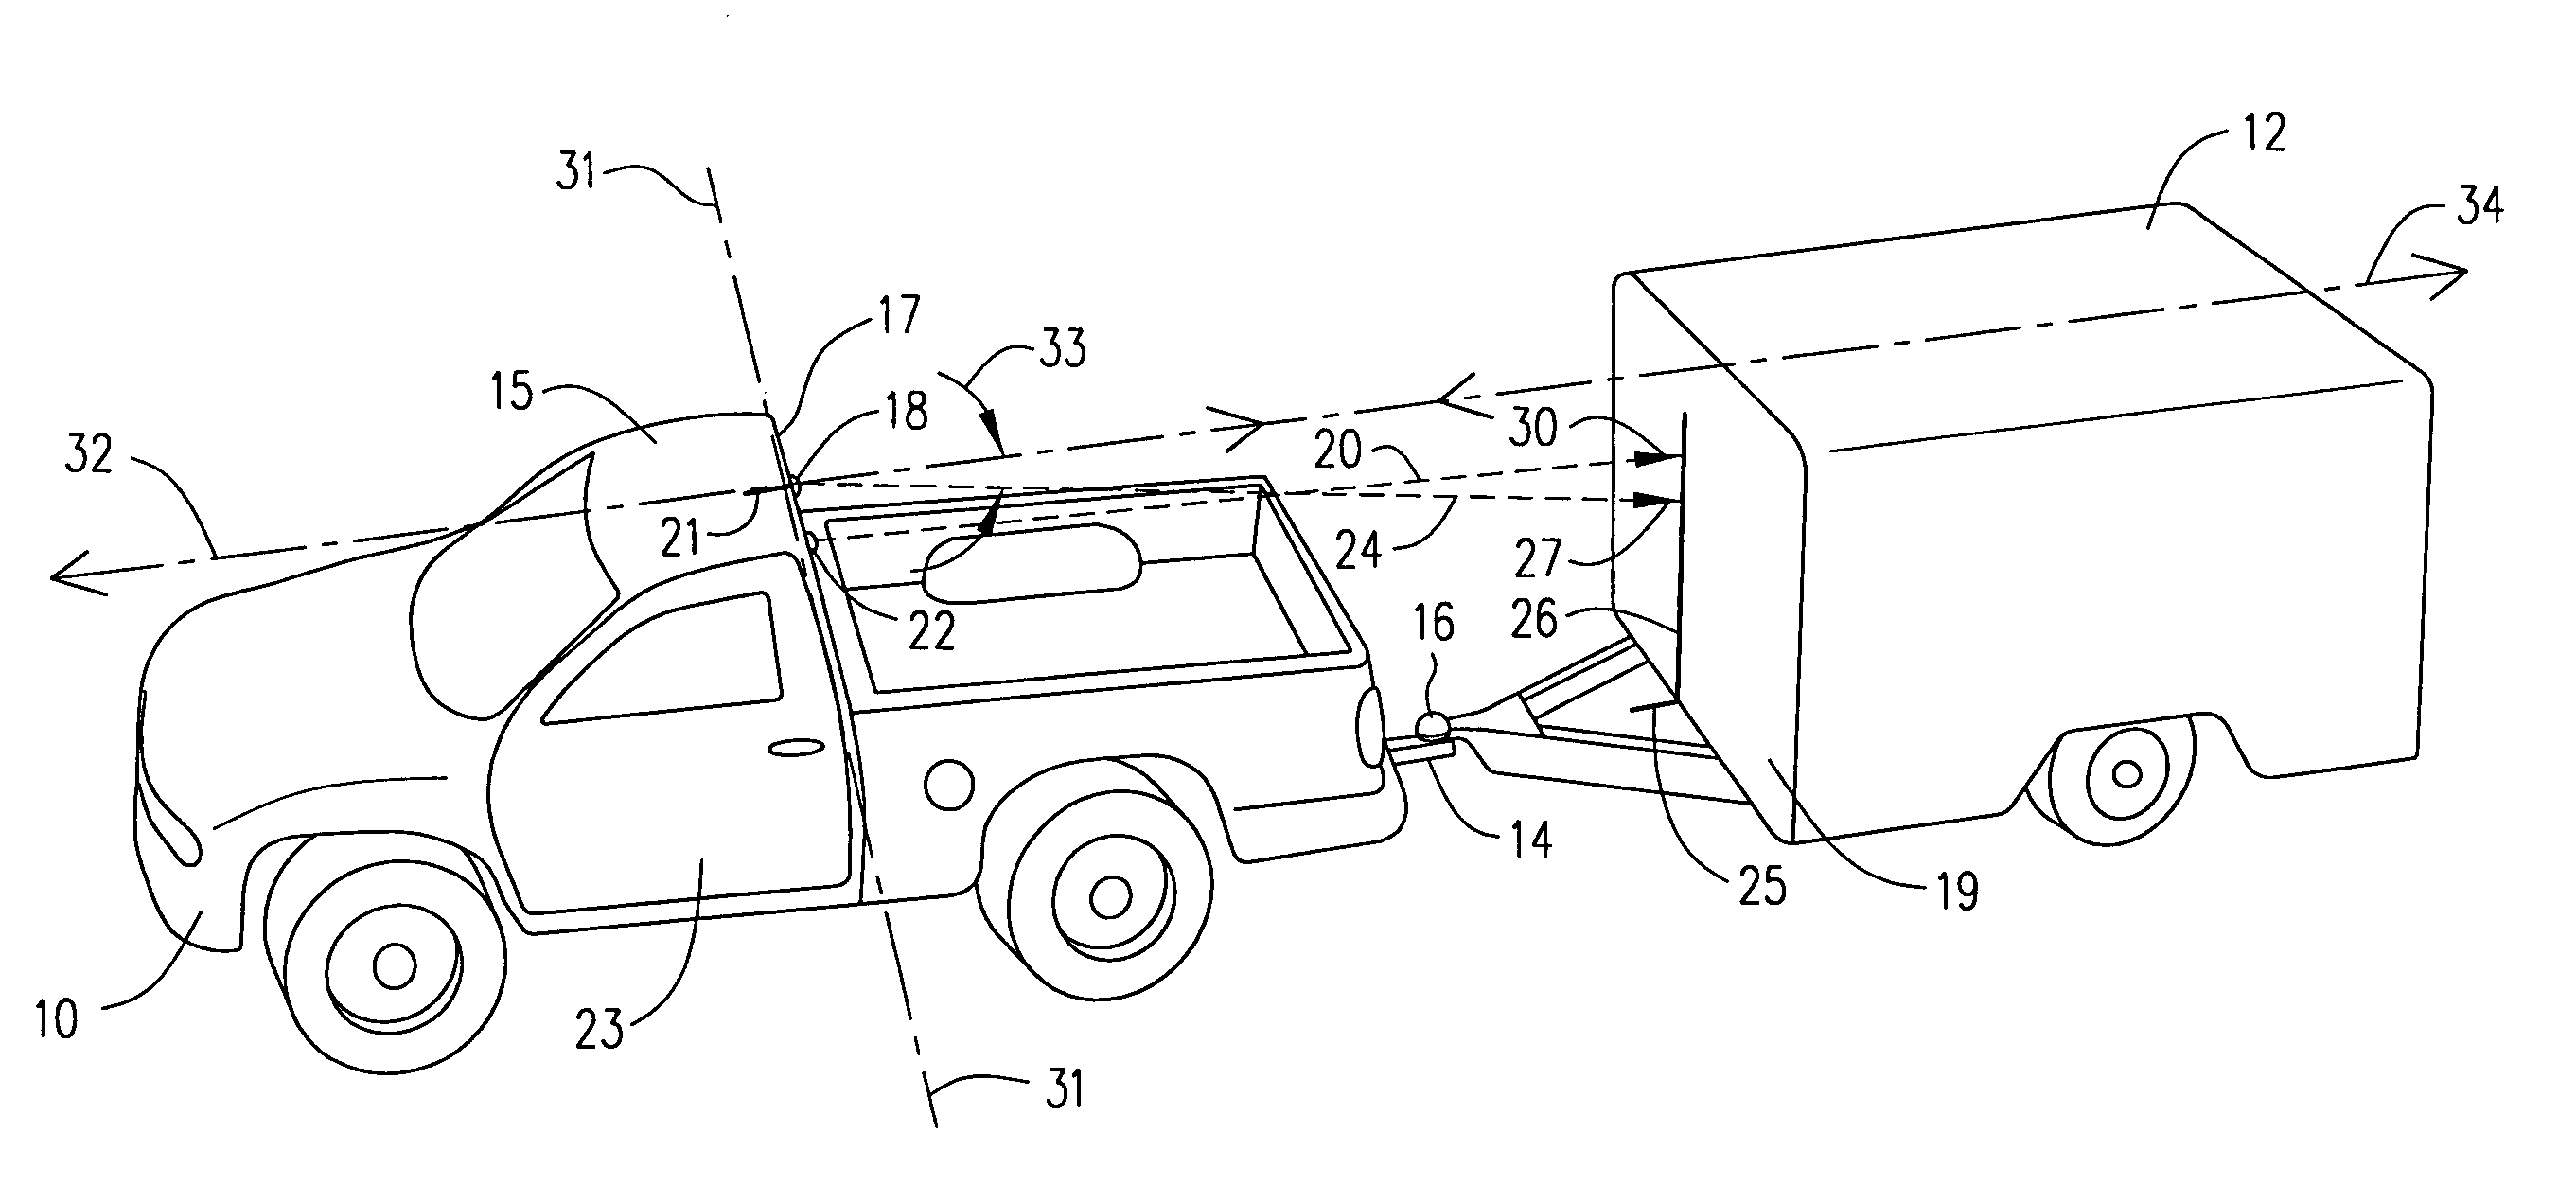 Object alignment device and method